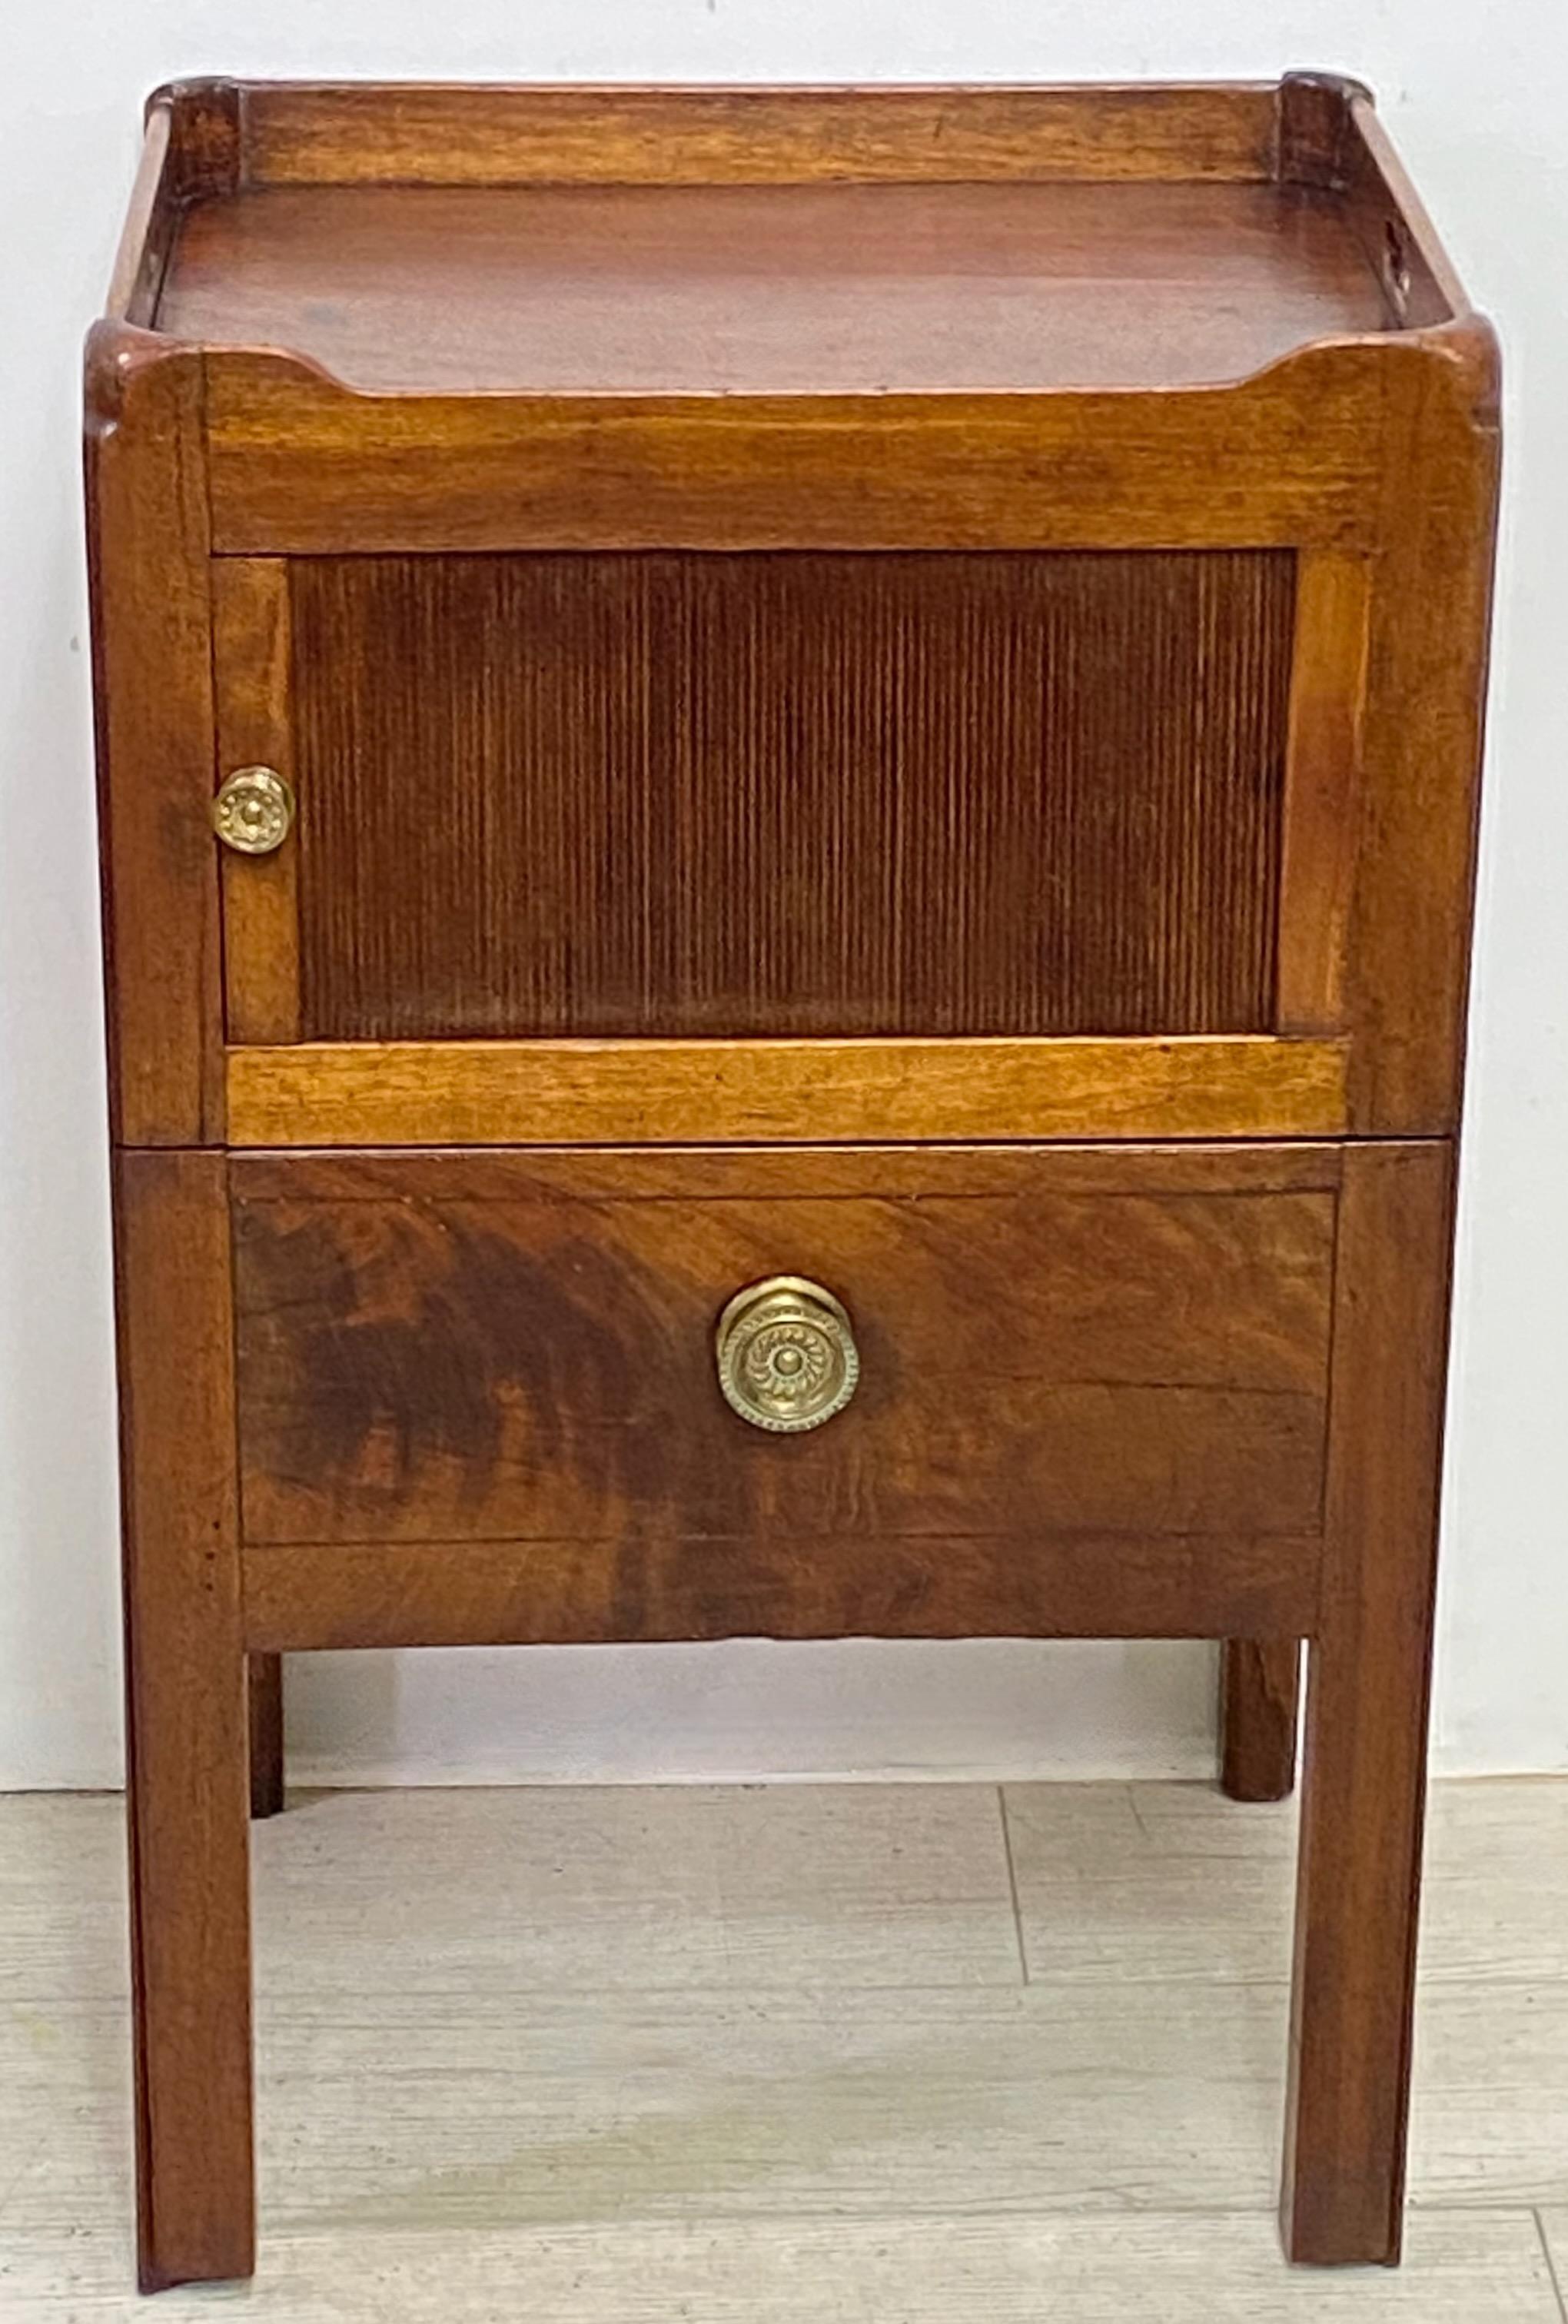 George III period mahogany side cabinet / table with sliding tambour door.
What was once the commode drawer has been converted to a deep storage drawer.
Refreshed original finish.
England, early 19th century, circa 1810.

